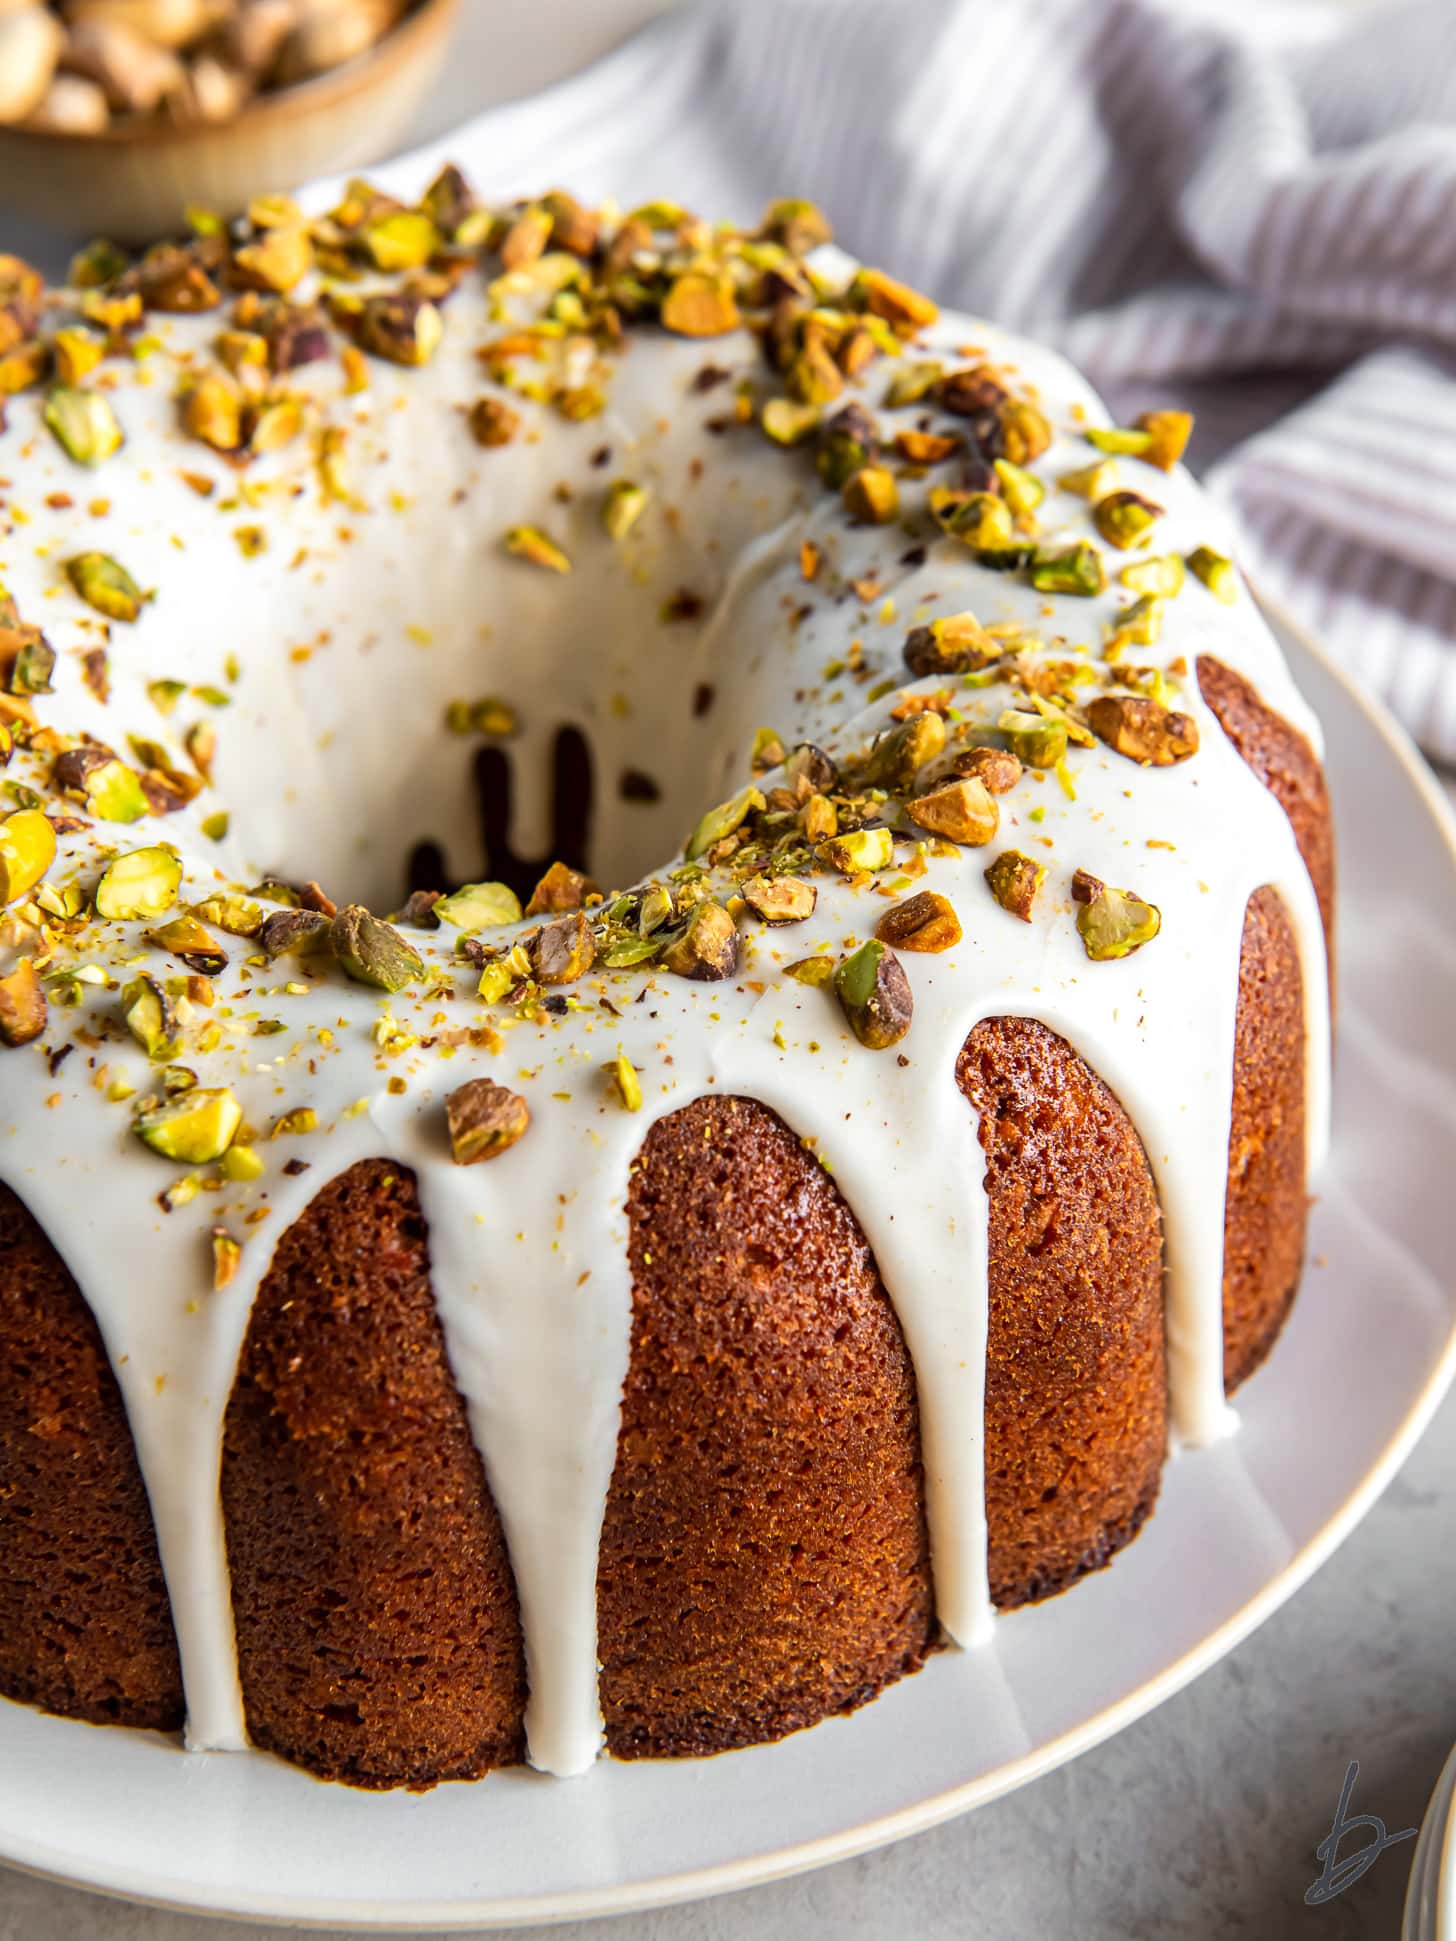 glaze dripping down sides of pistachio bundt cake garnished with chopped pistachios.